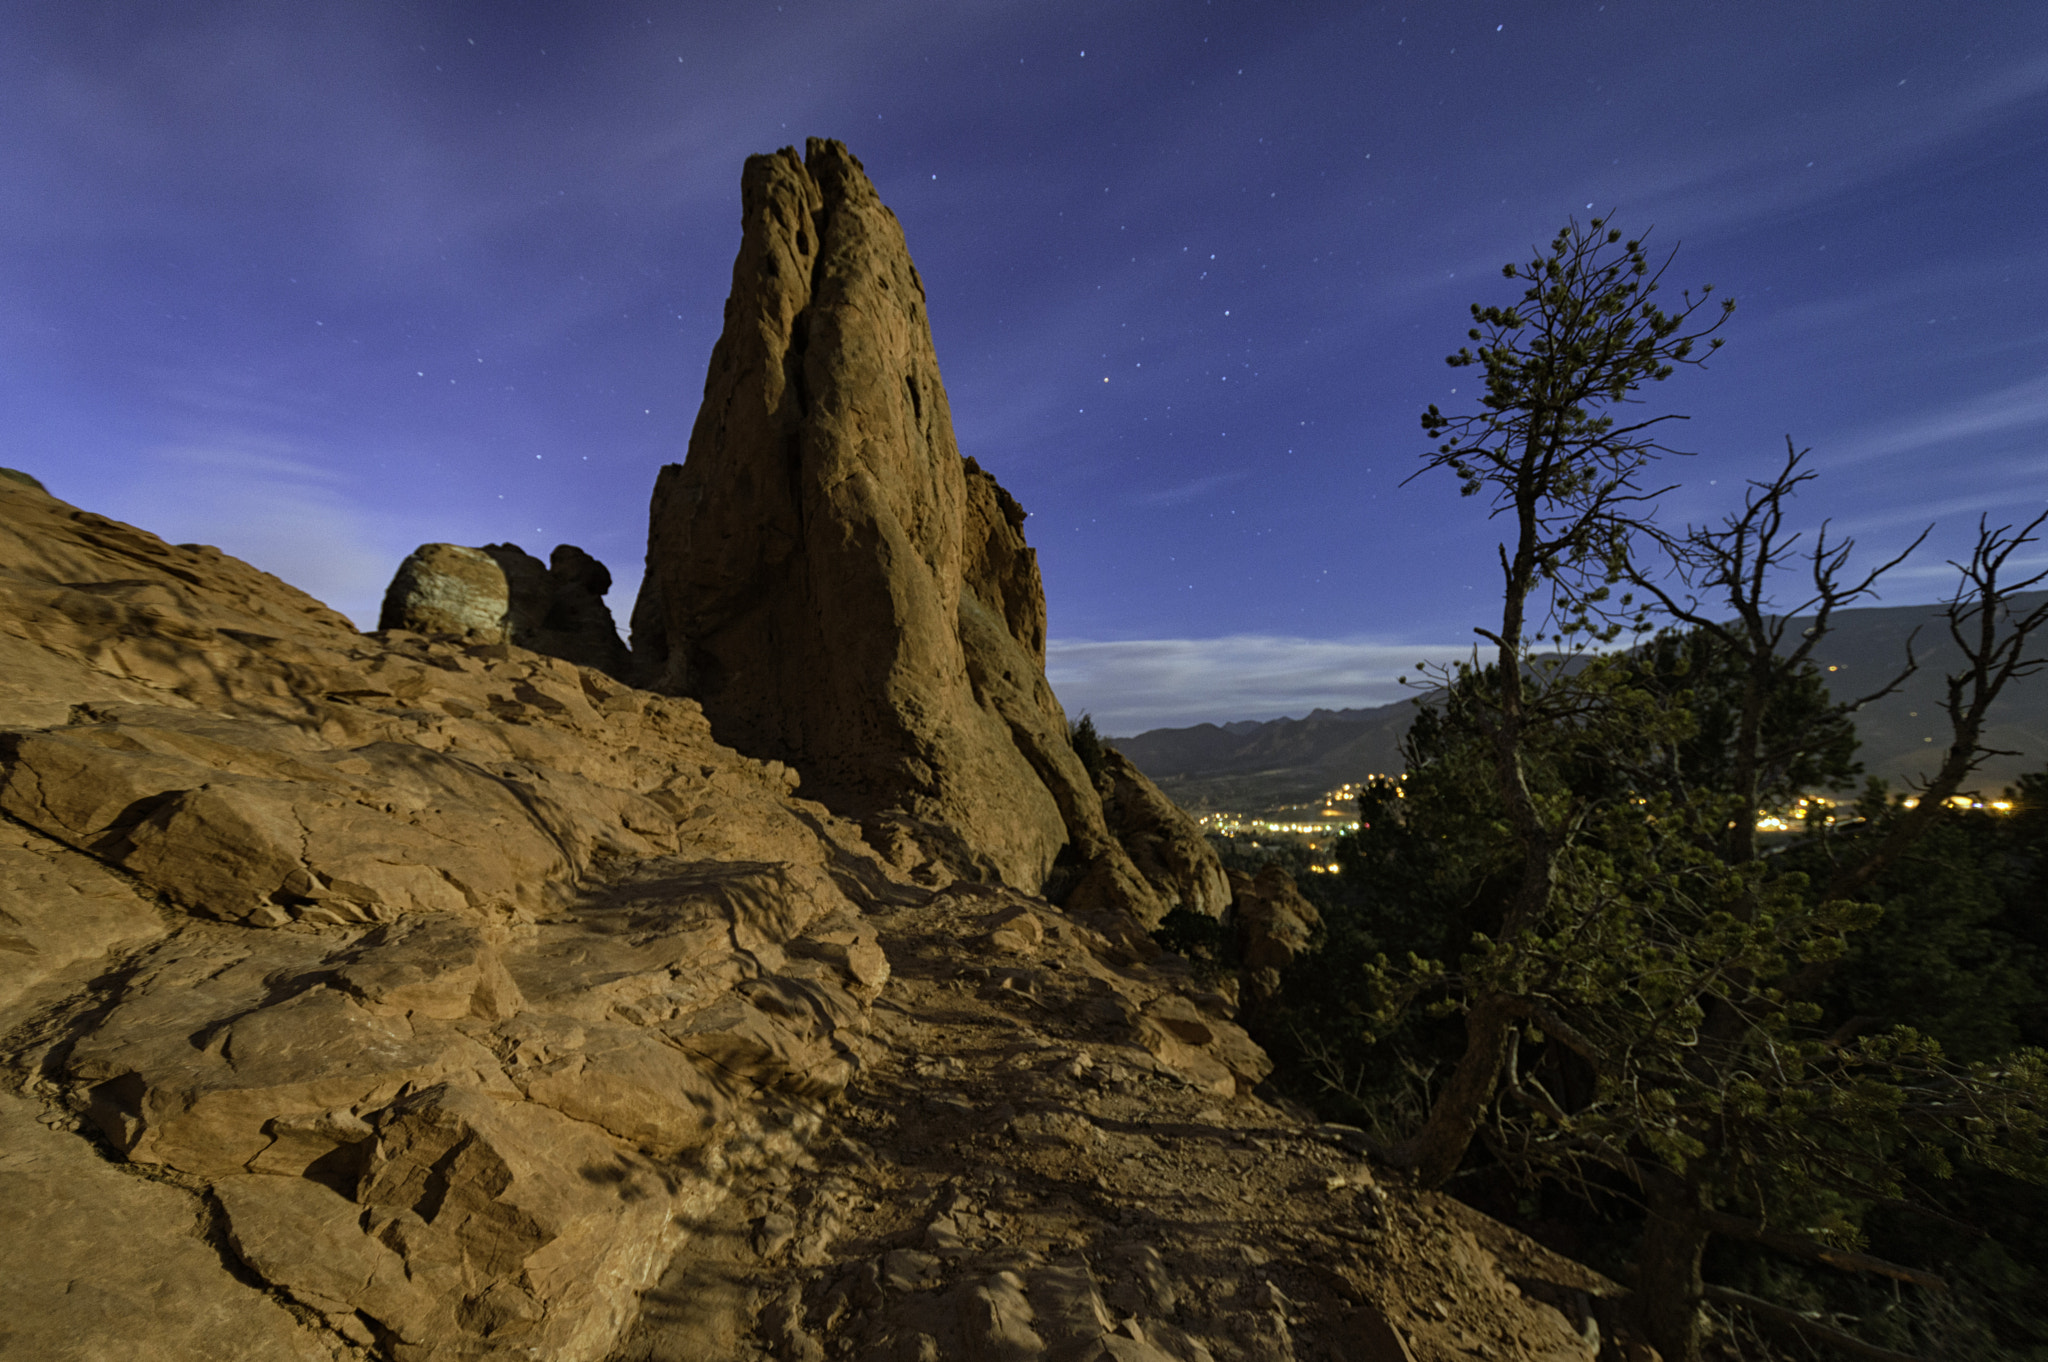 Nikon D3200 sample photo. Garden of the gods after hours photography